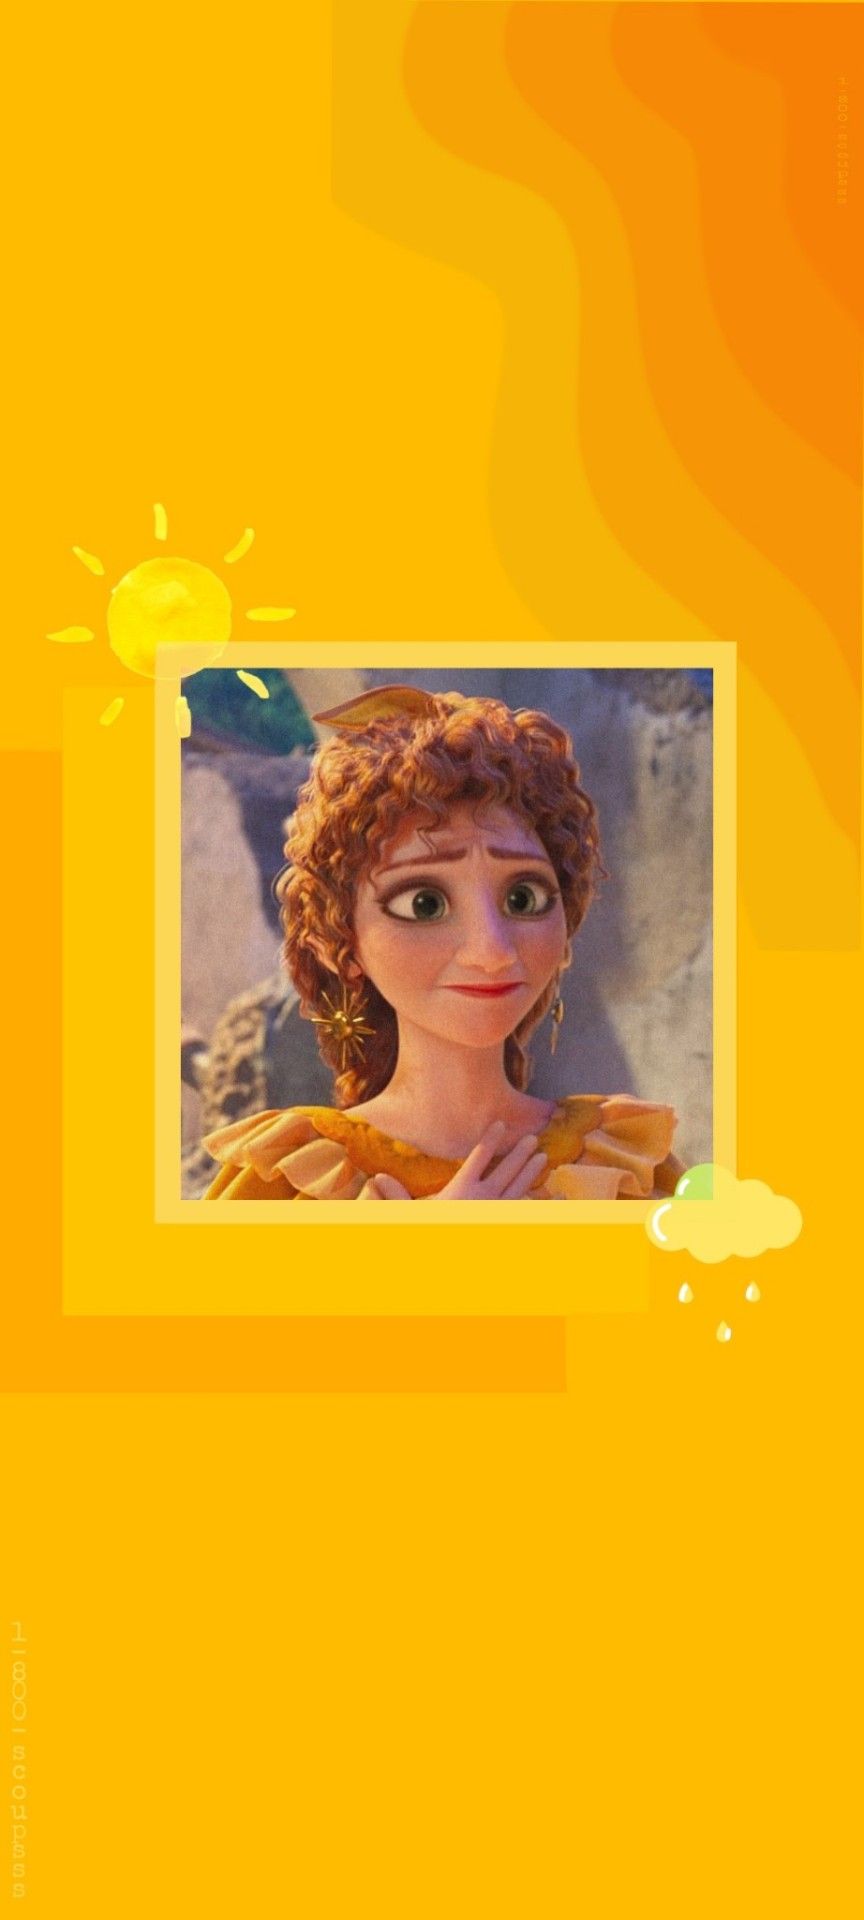 IPhone wallpaper of Anna from Frozen 2 with a yellow background - Encanto